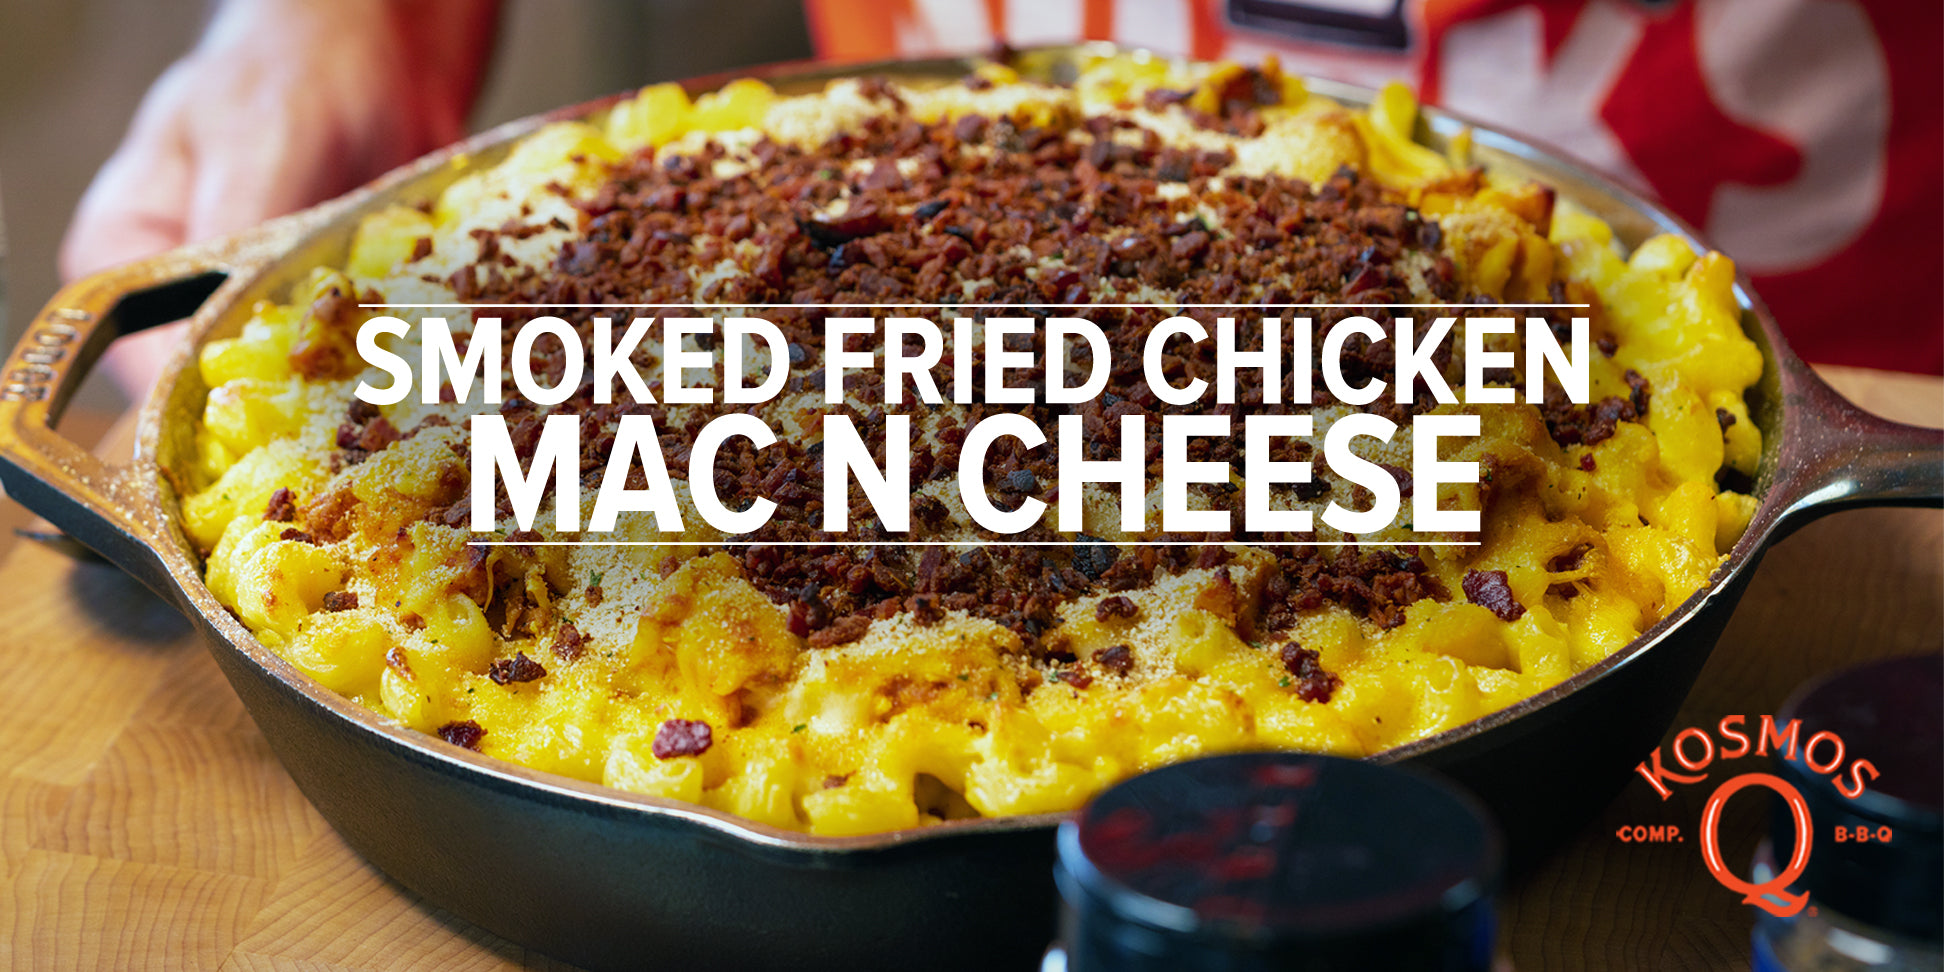 Smoked Fried Chicken Mac and Cheese